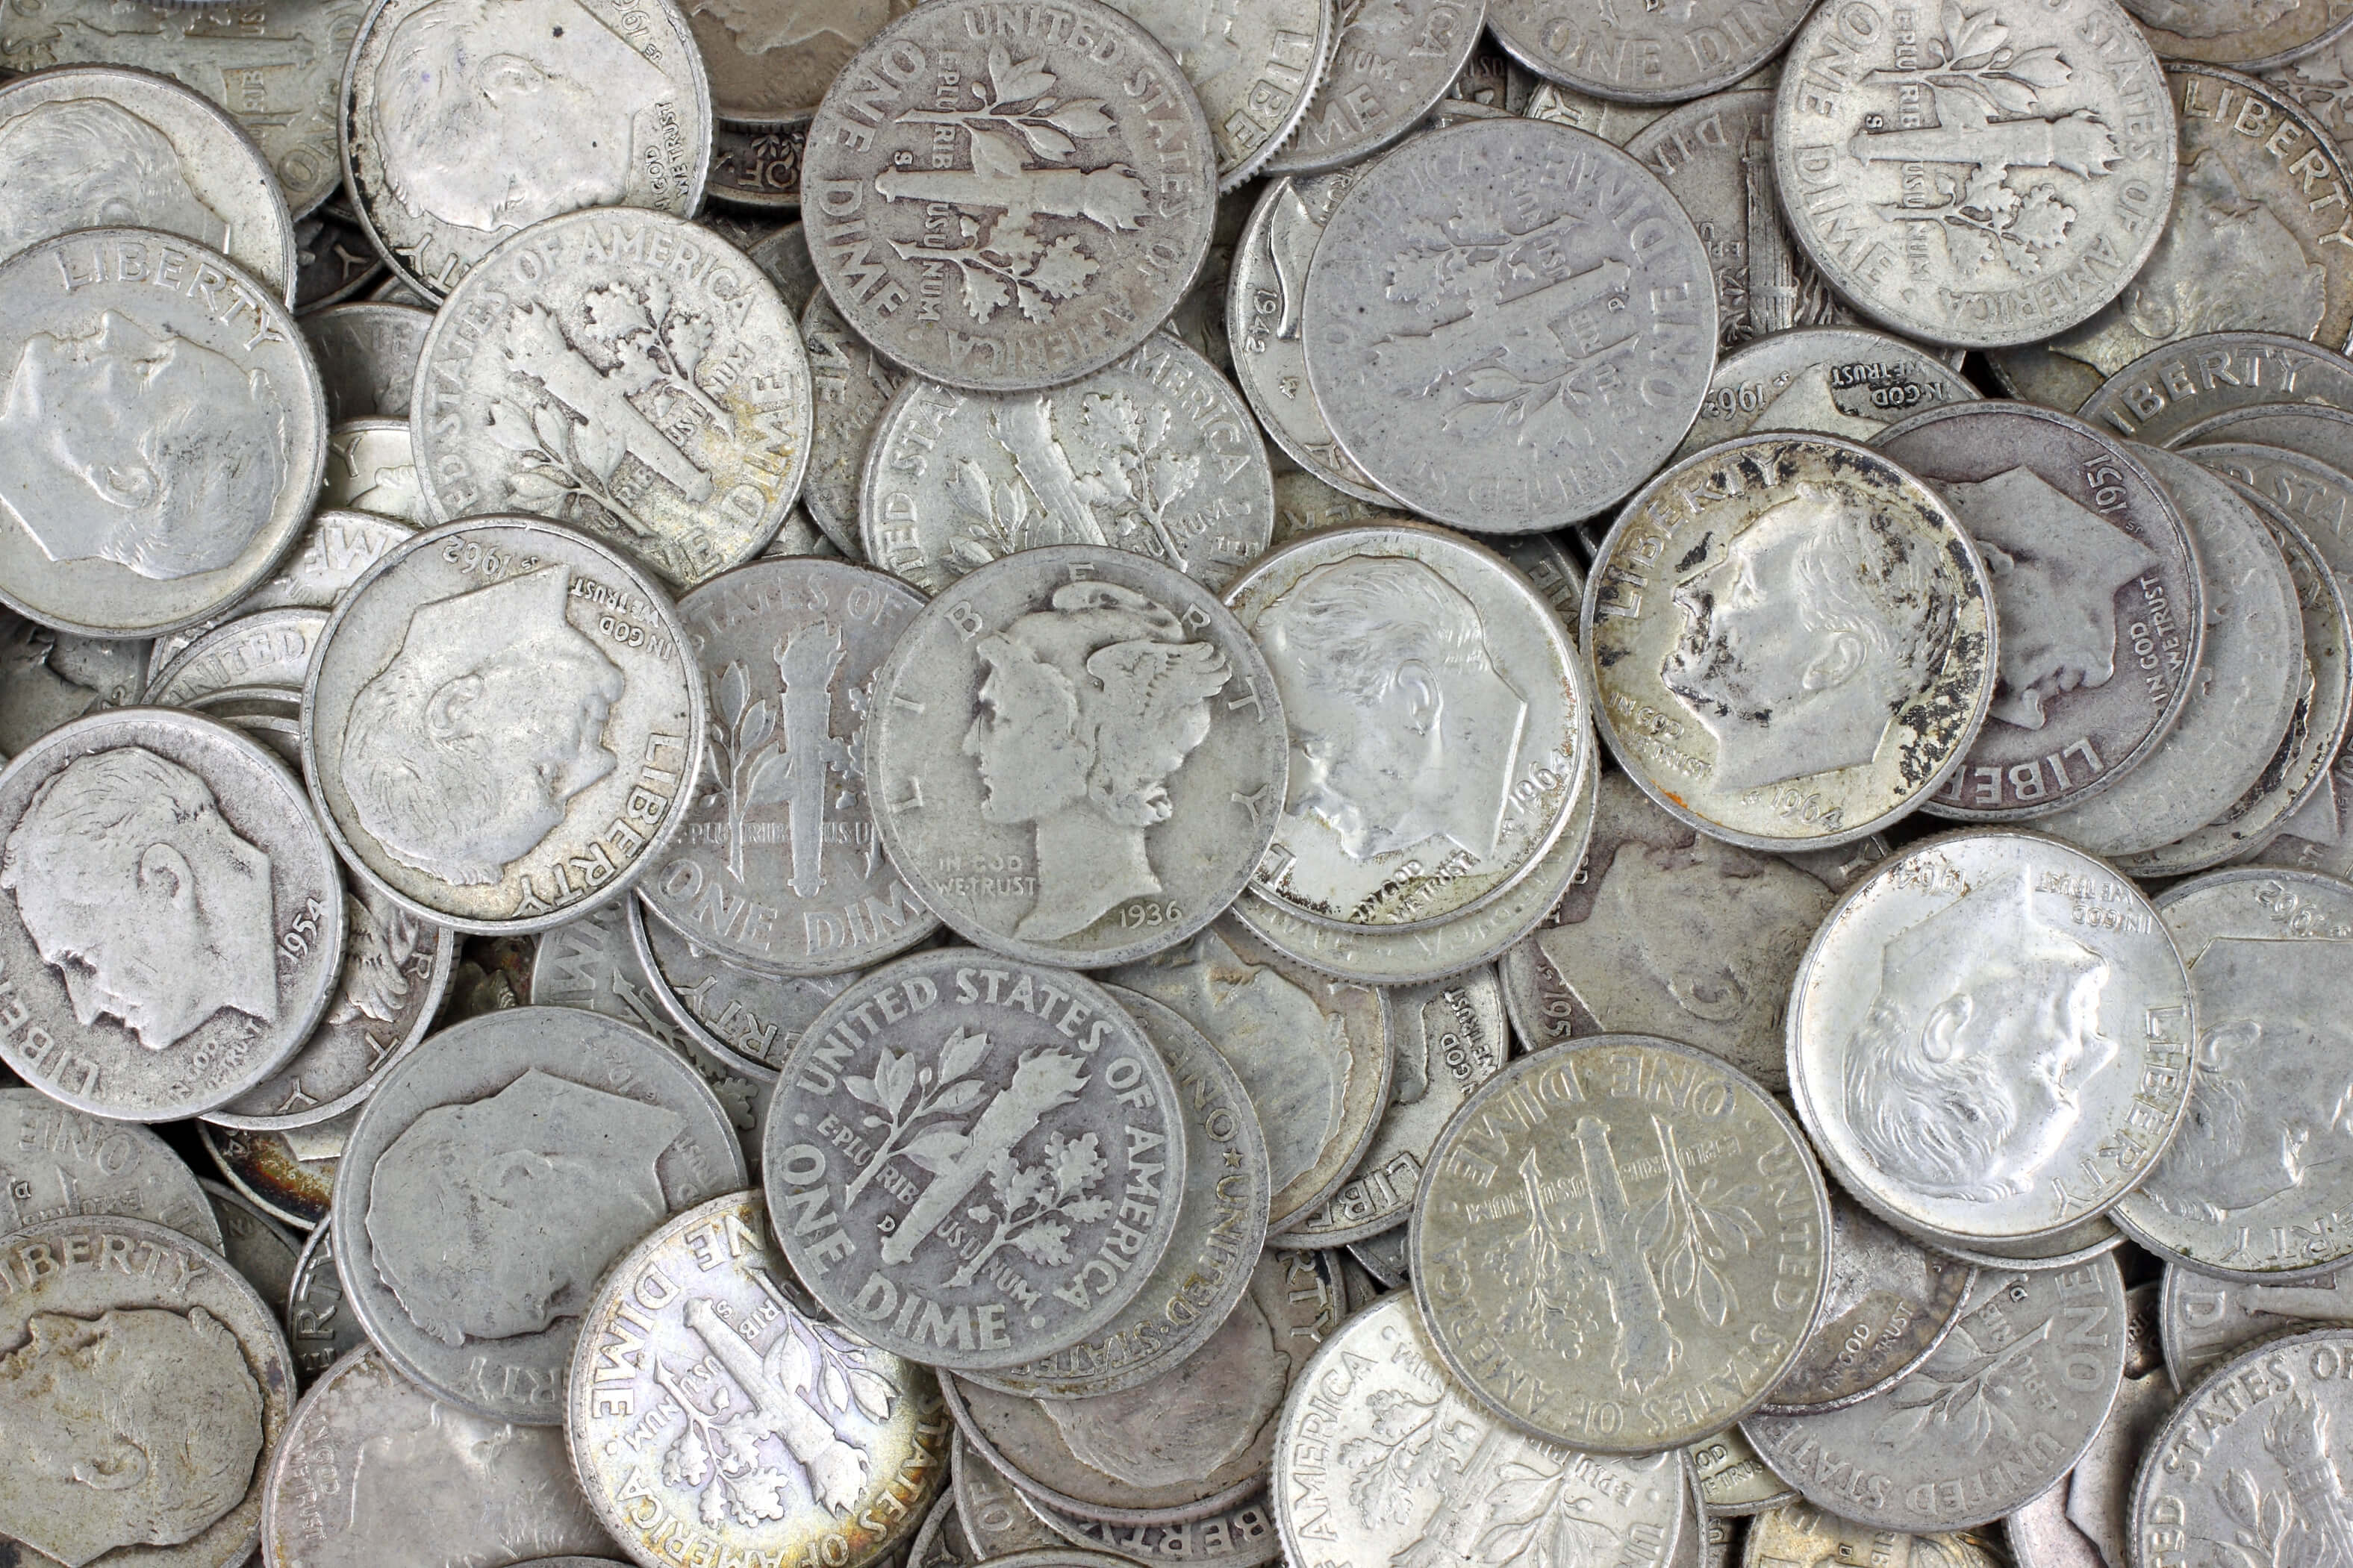 How To Buy Silver Coins: Step-by-Step Guide